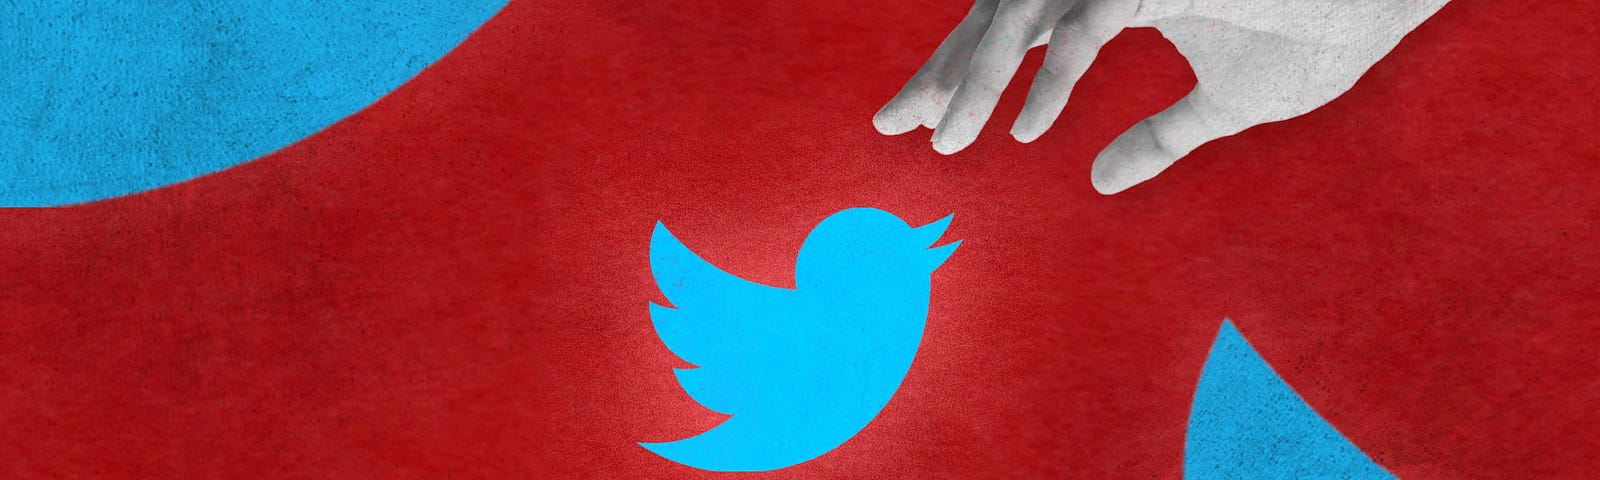 Two hands reaching for the Twitter logo.